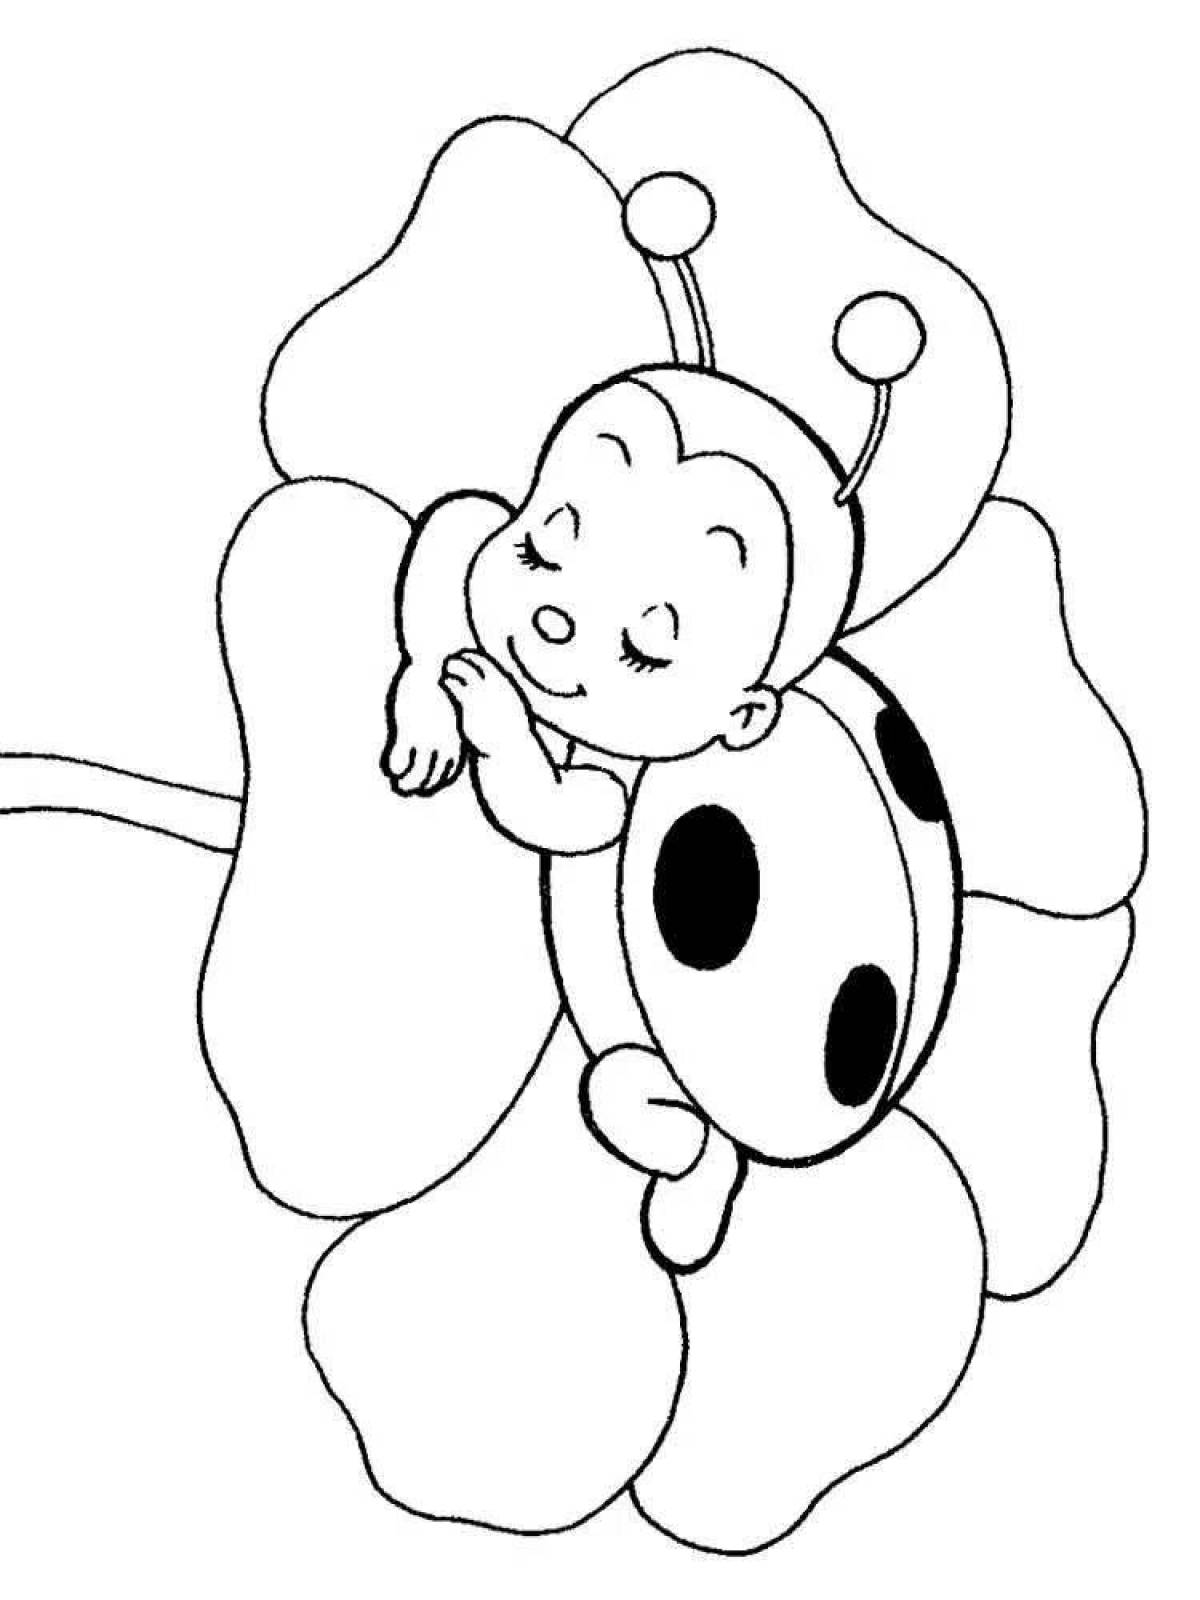 Coloring page happy ladybug for kids